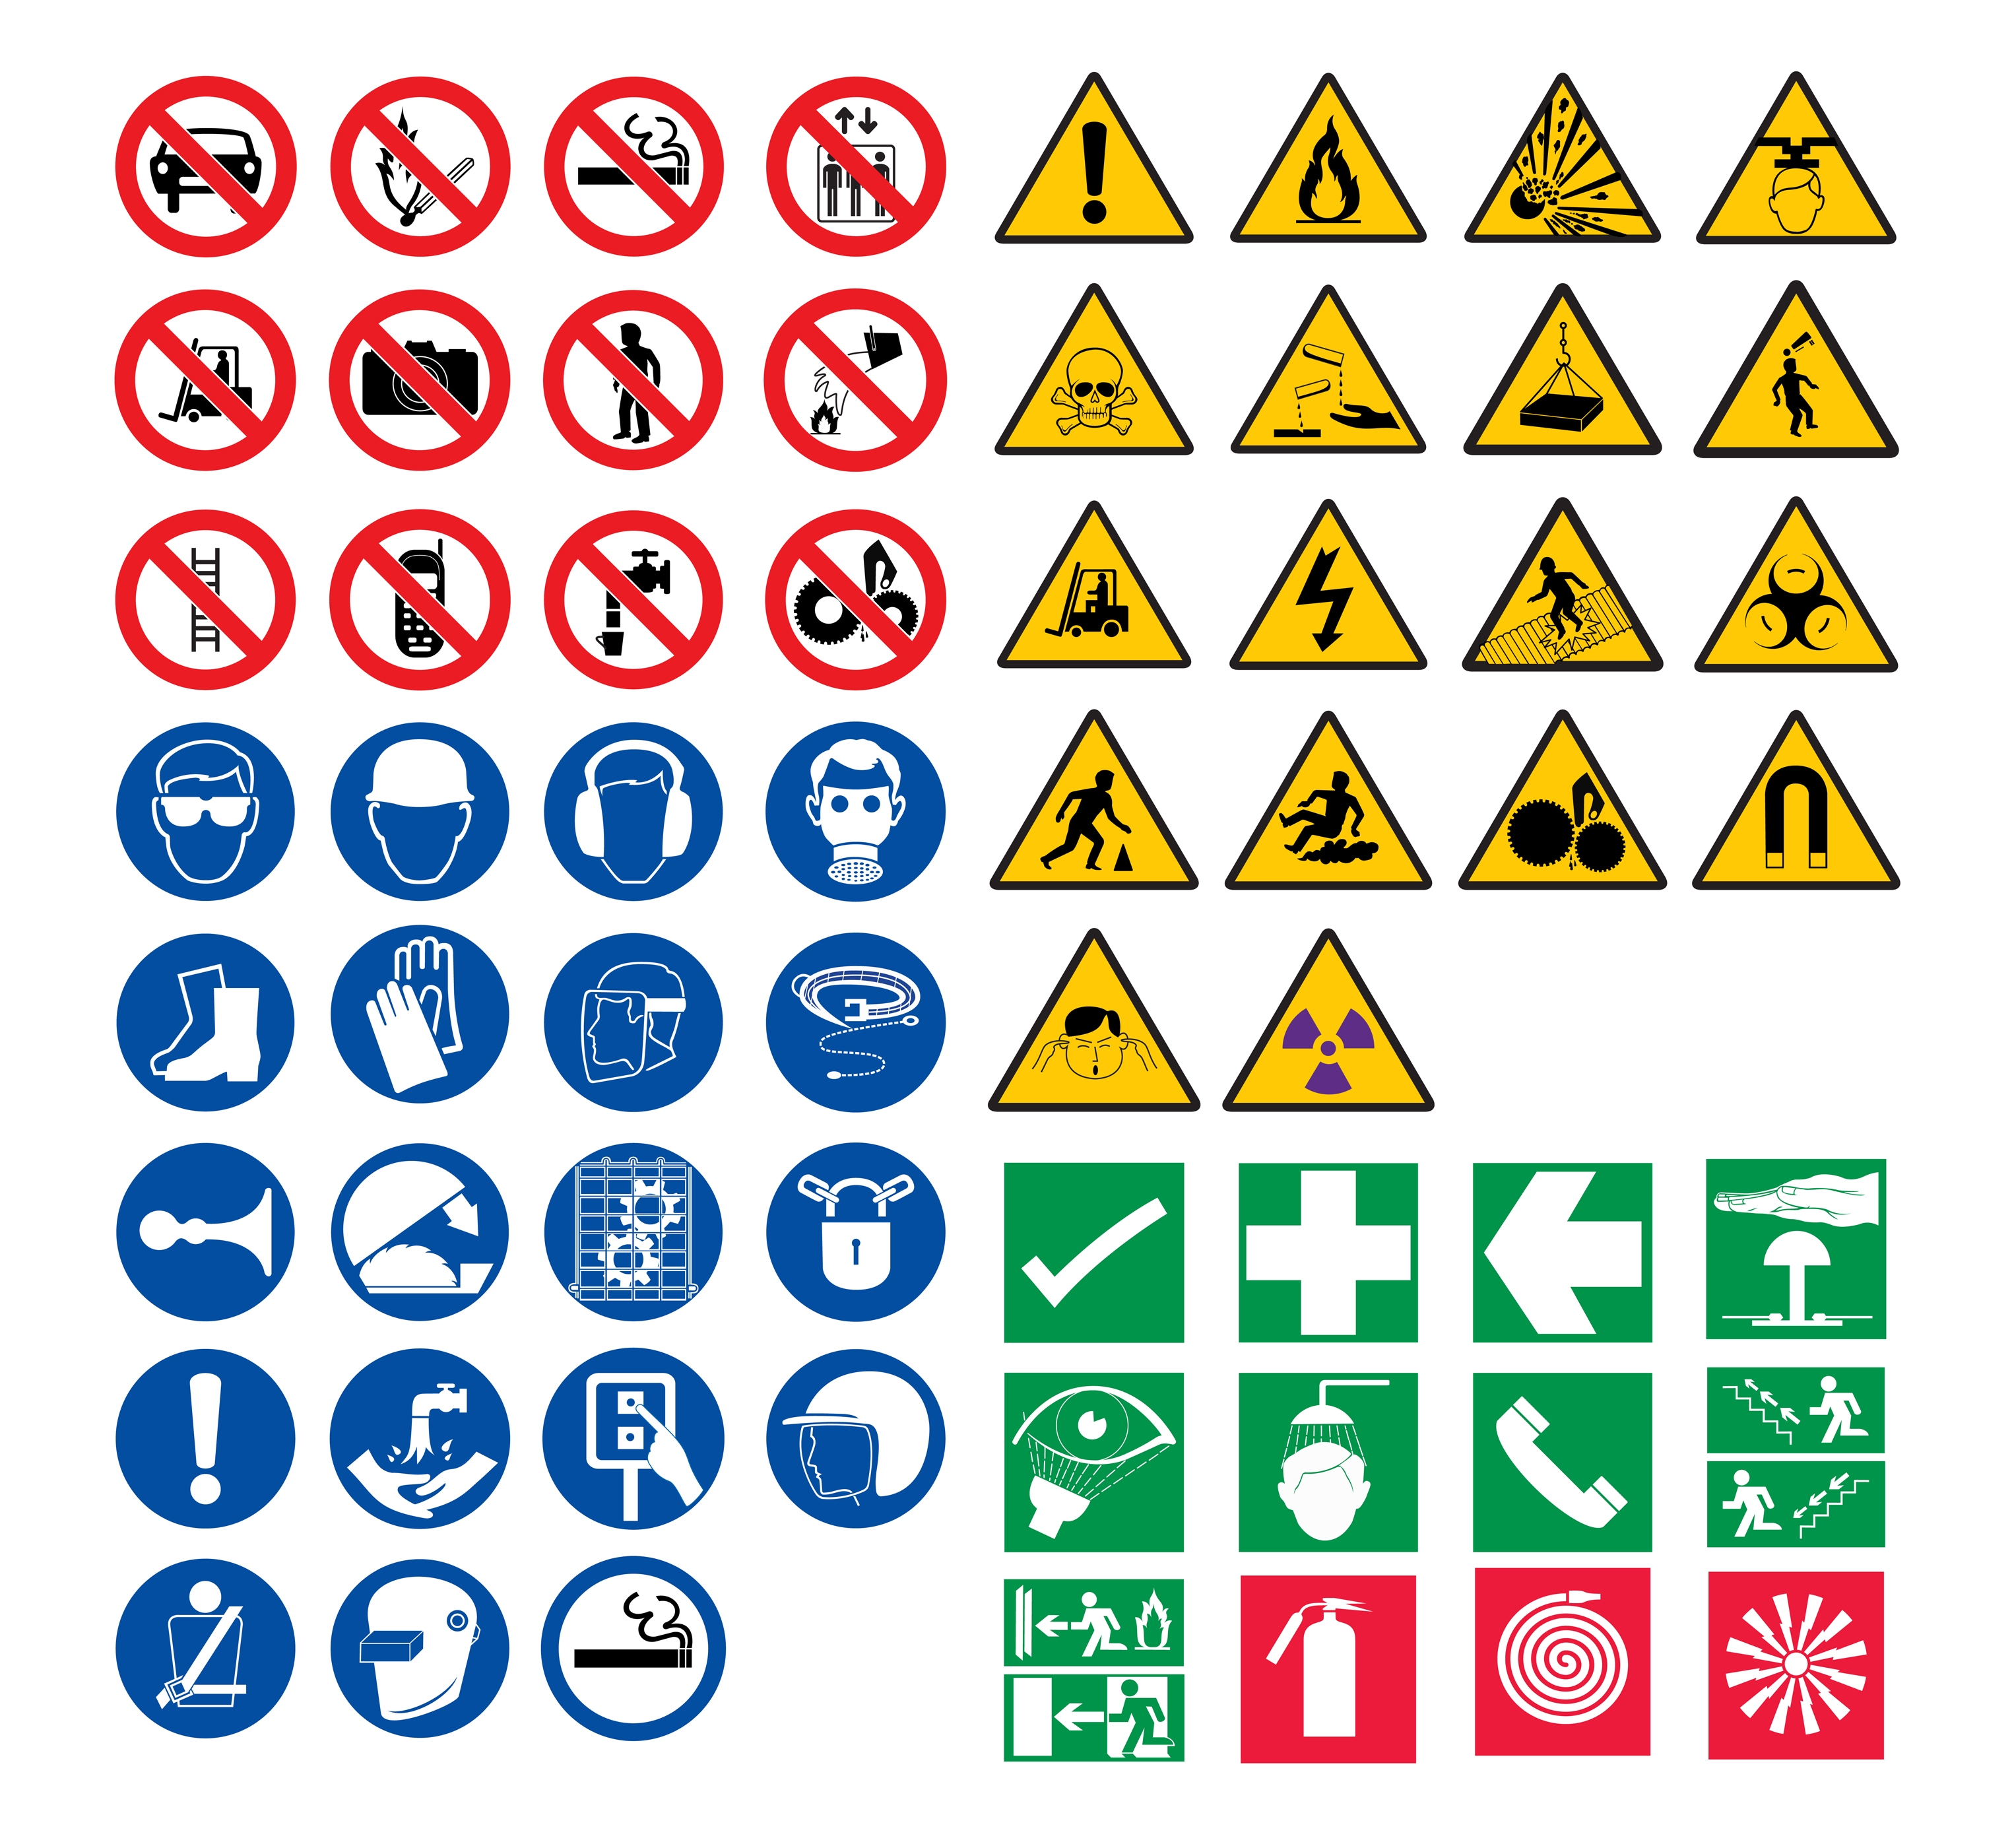 Occupational Health And Safety Signs And Symbols - ClipArt Best ...